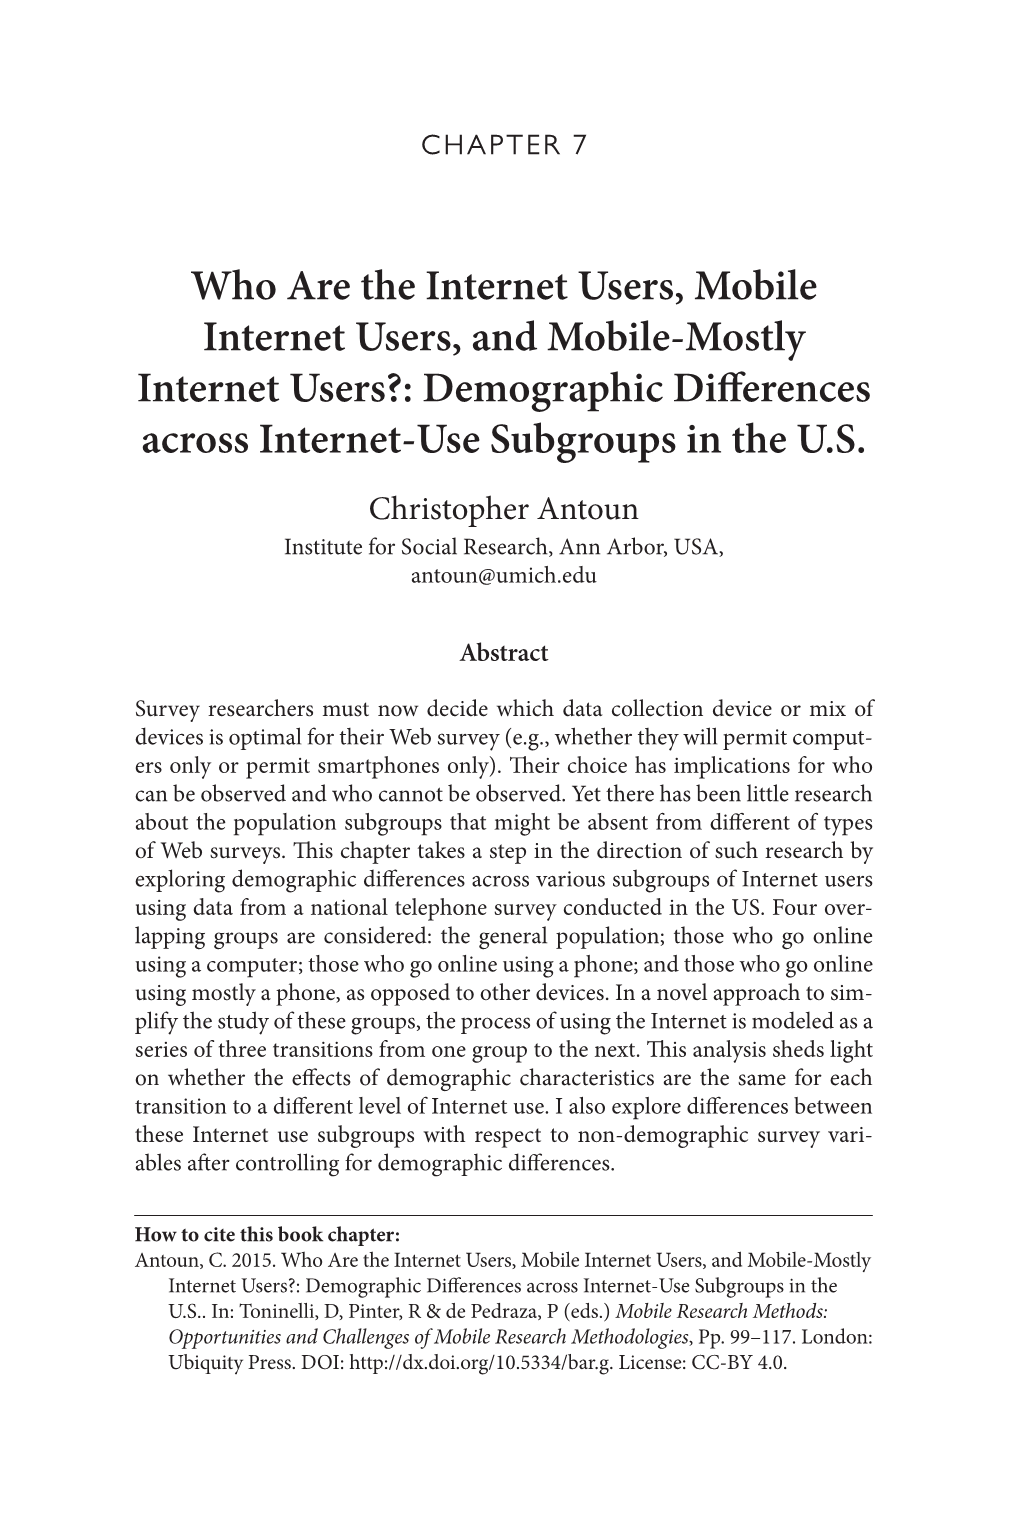 Demographic Differences Across Internet-Use Subgroups in the US